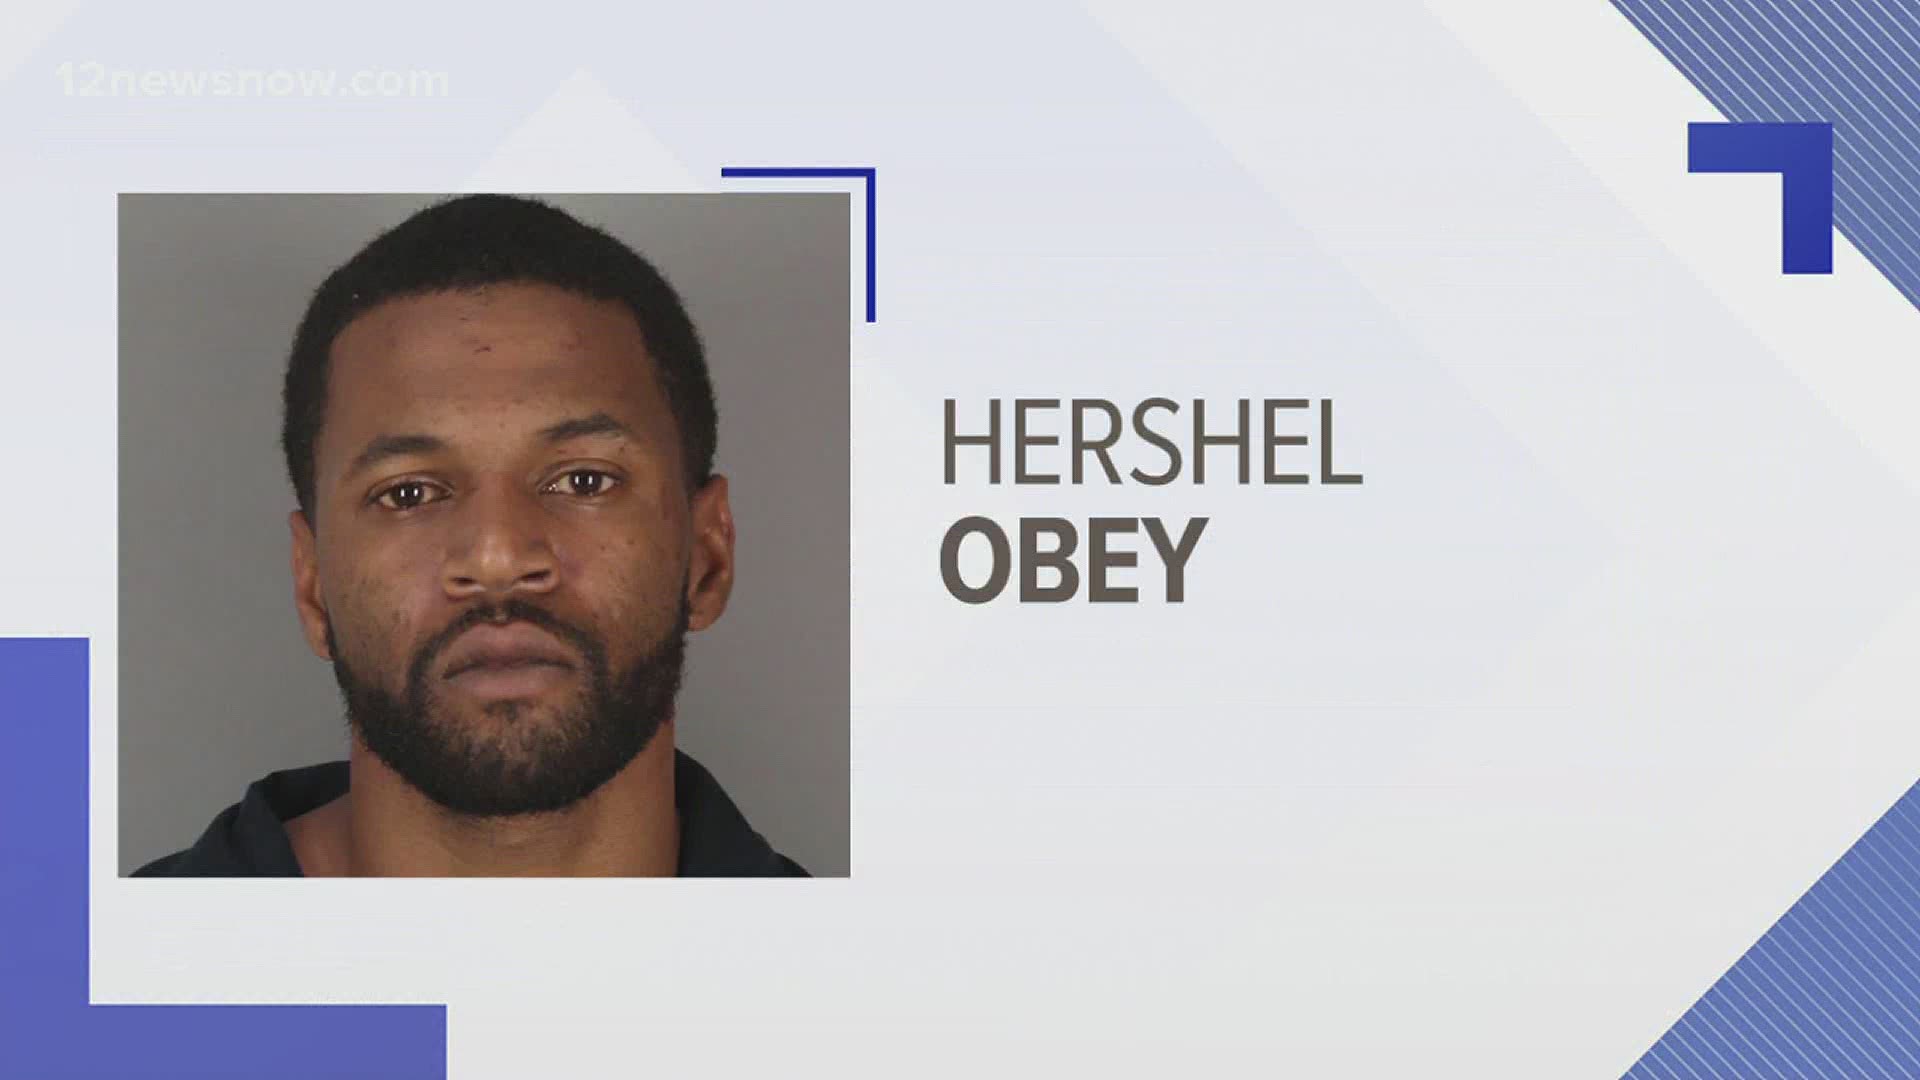 Port Arthur Police had been trying to find Hershel Obey for more than a week.